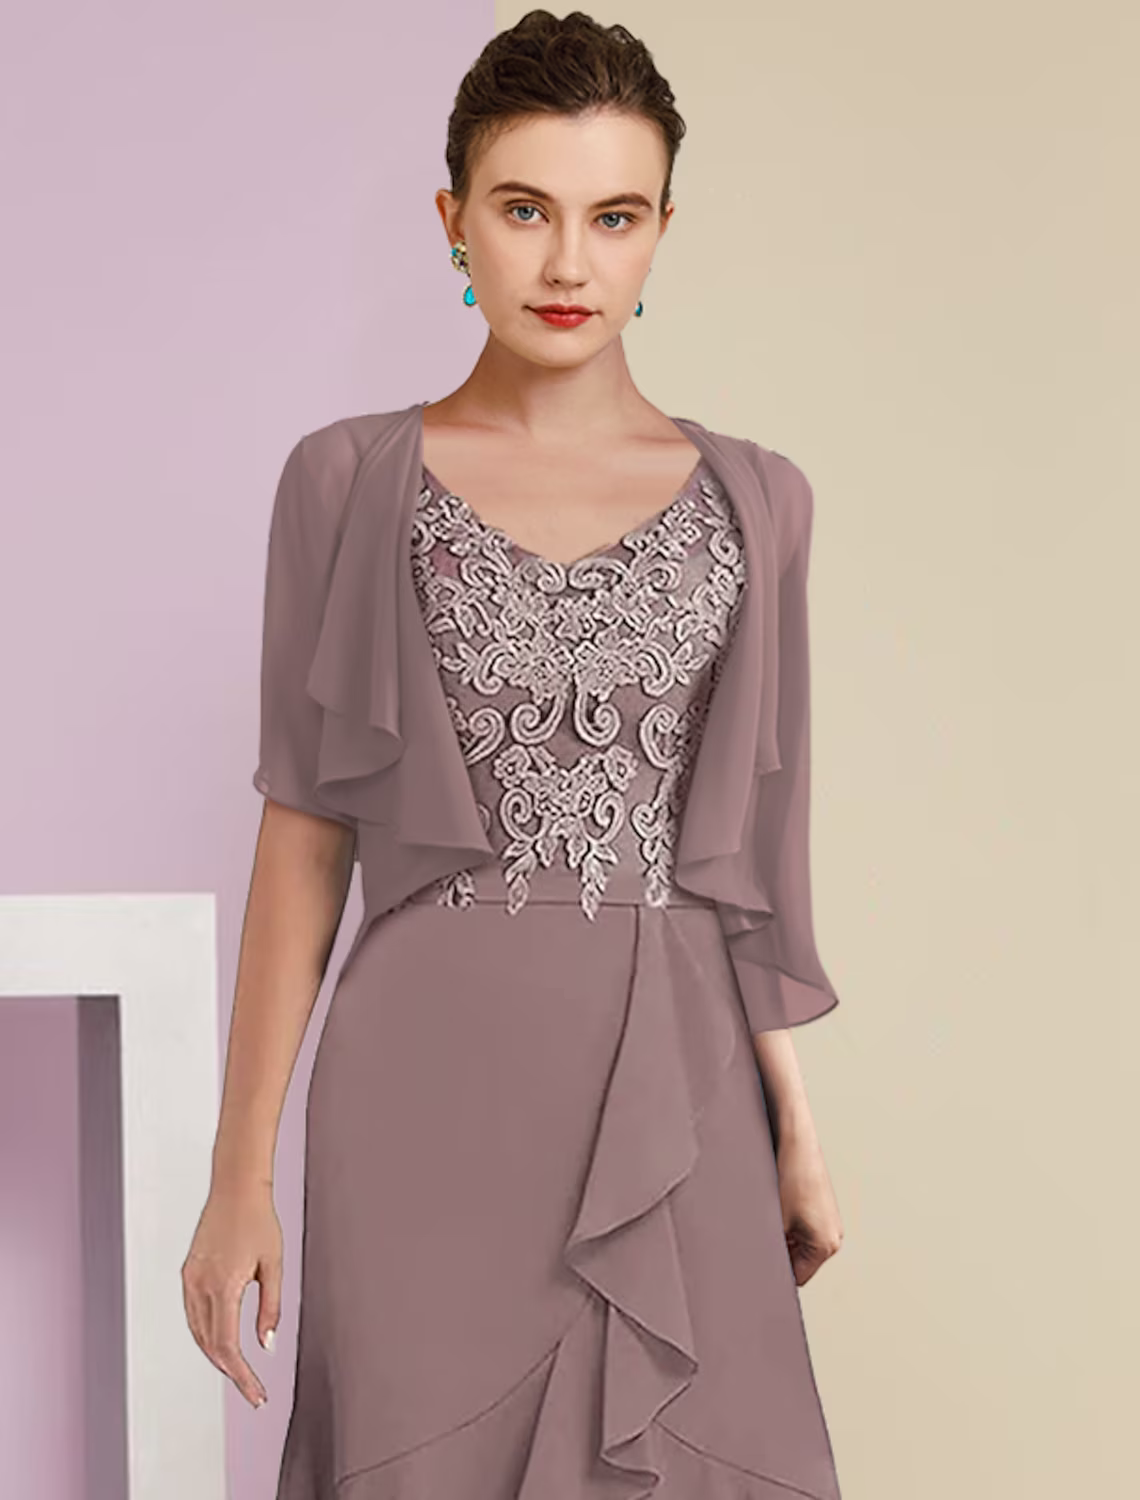 Two Piece A-Line Mother of the Bride Dress Formal Wedding Guest Elegant High Low V Neck Asymmetrical Length Chiffon Lace Short Sleeve Sleeve Wrap Included with Appliques